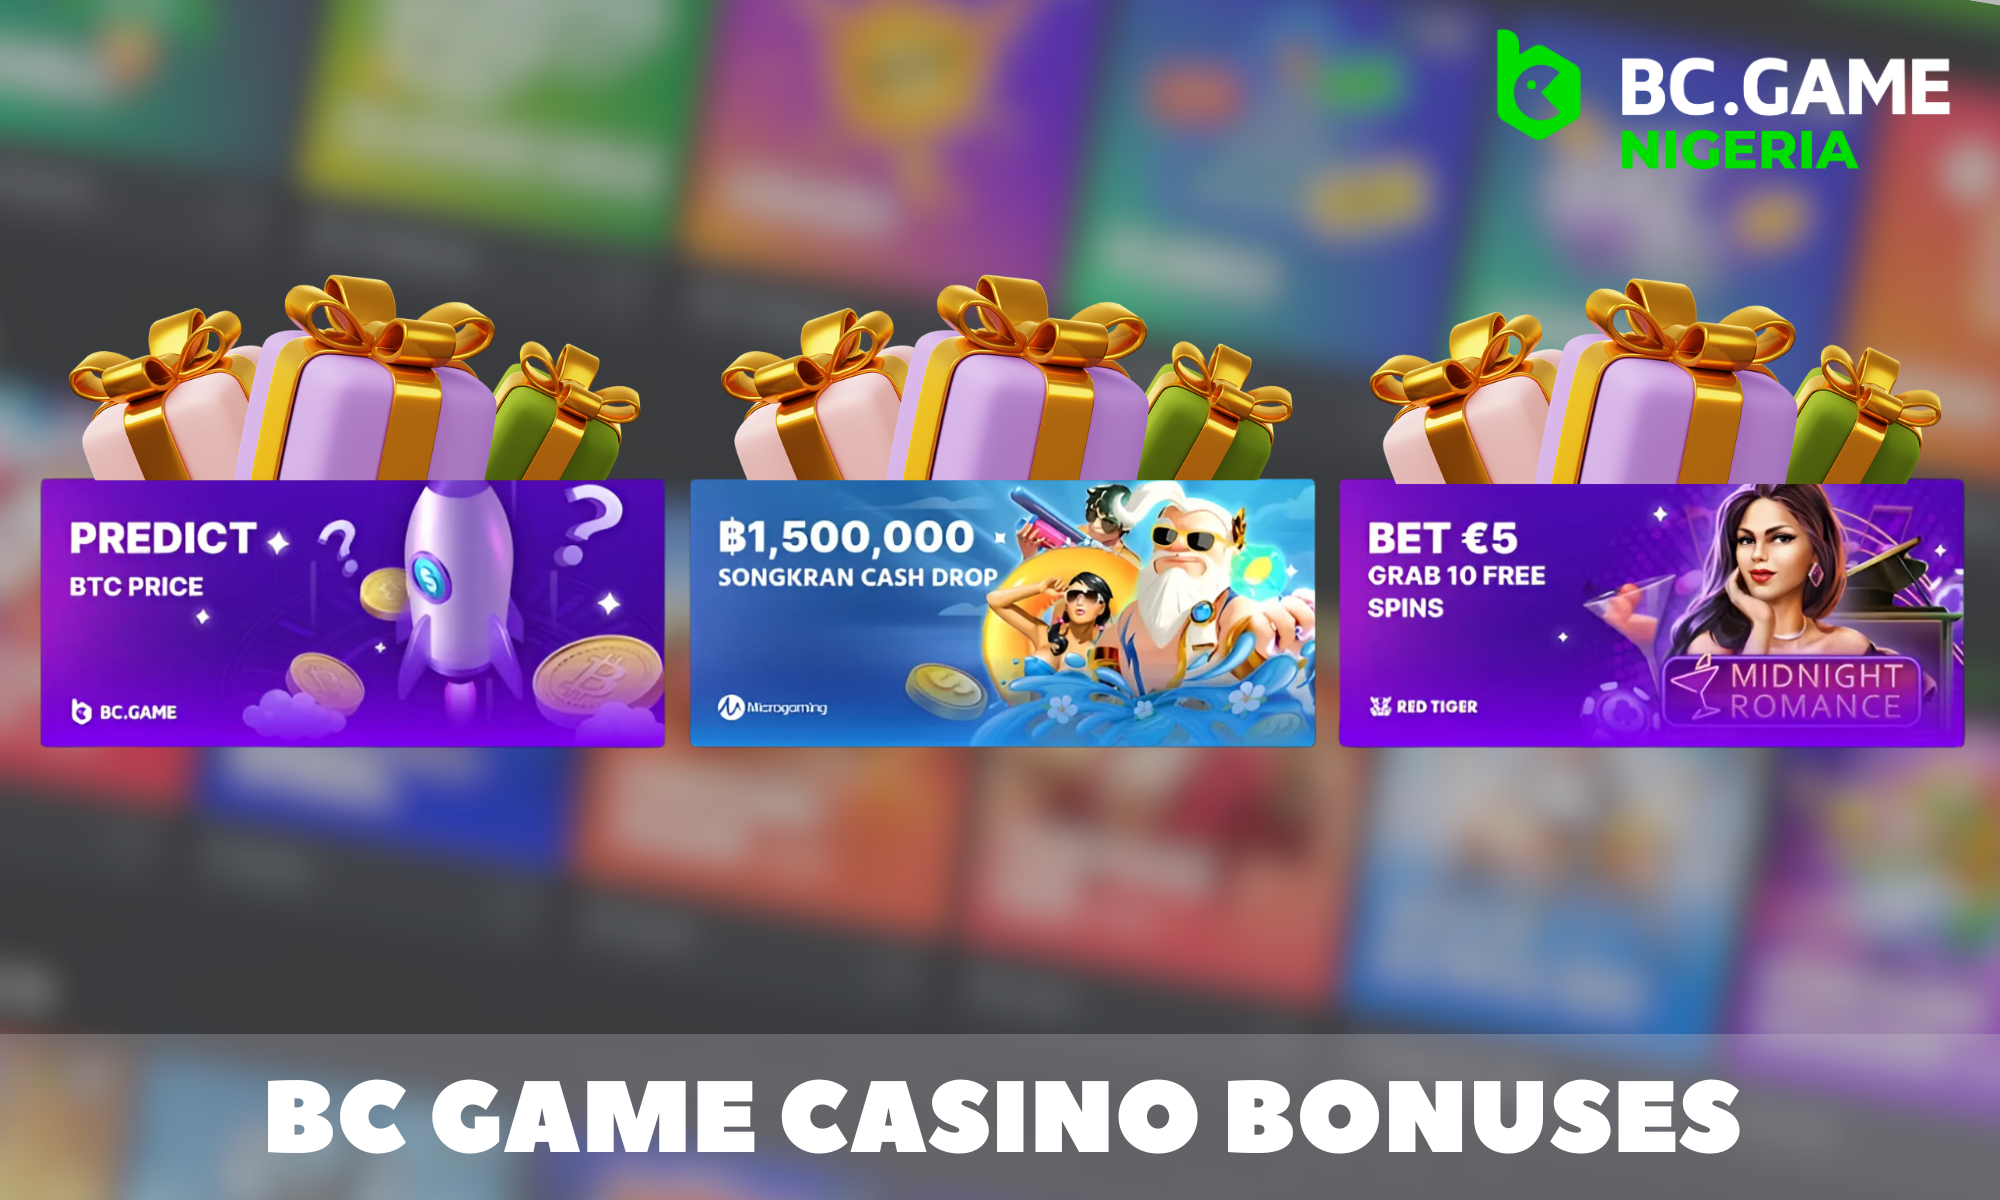 BC Game players can claim a variety of bonuses, including a welcome offer